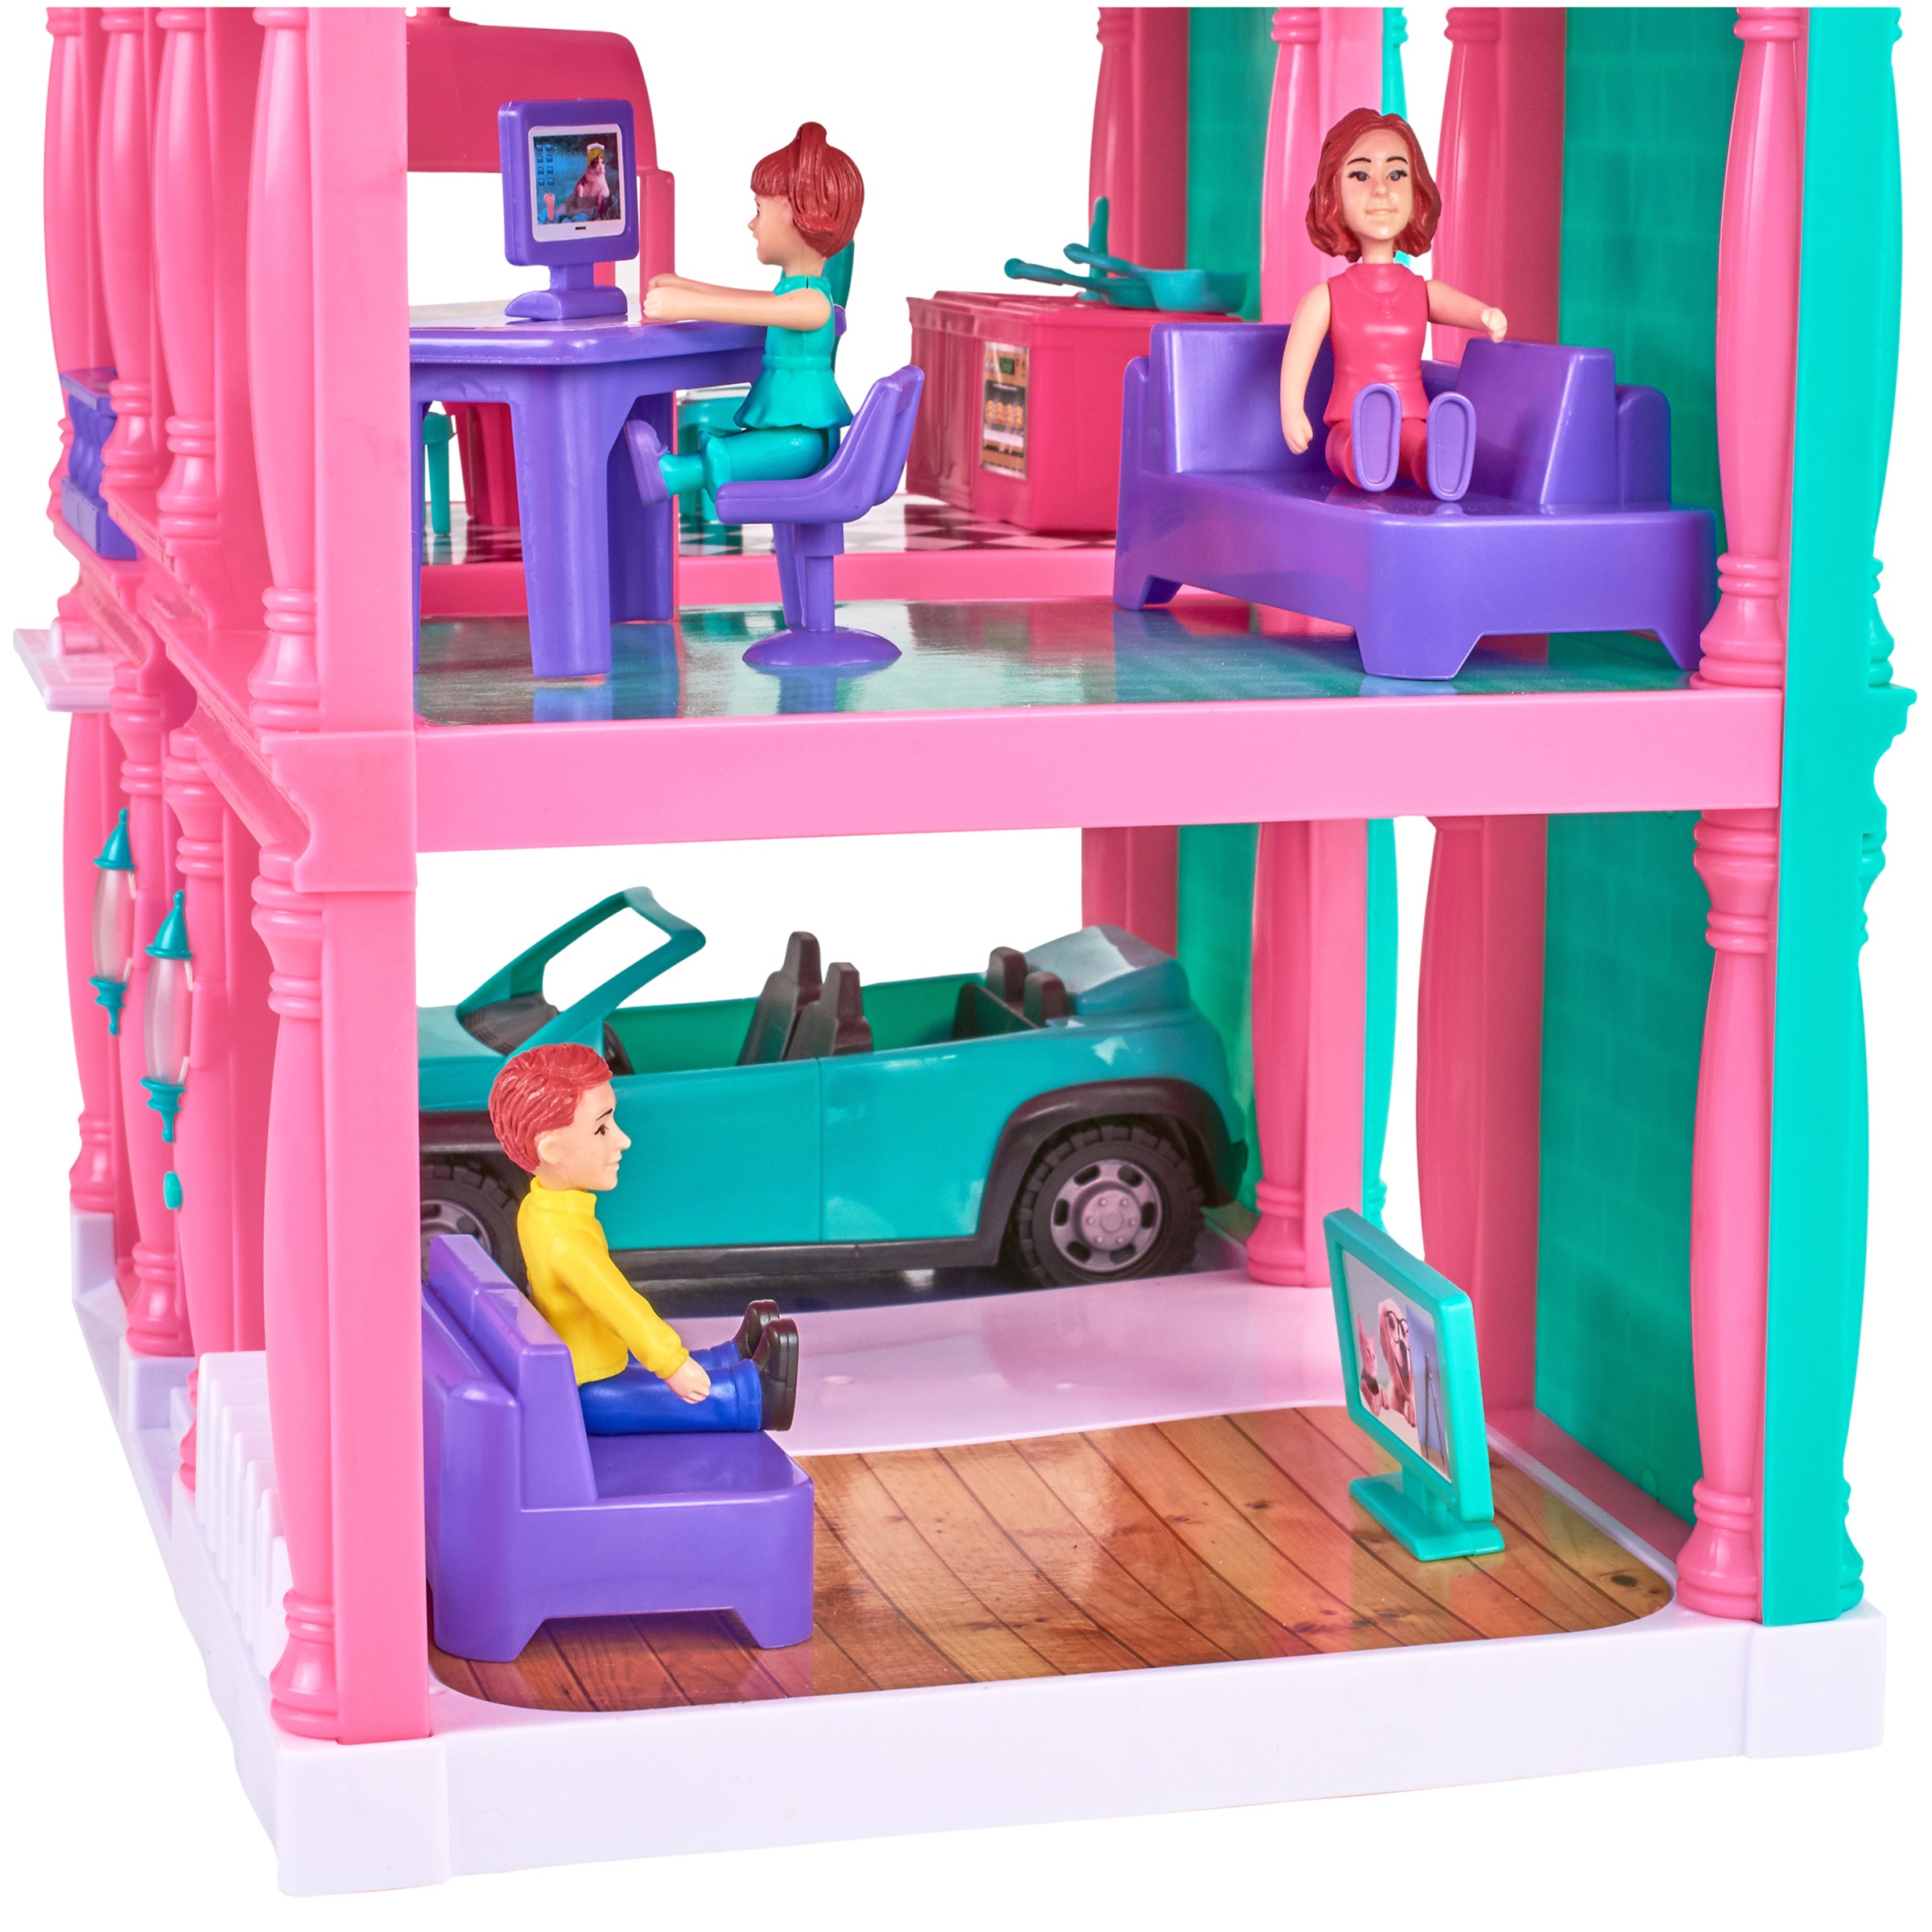 Kid Connection 3-Story Dollhouse Play Set with Working Garage and Elevator, 24 Pieces - image 3 of 6